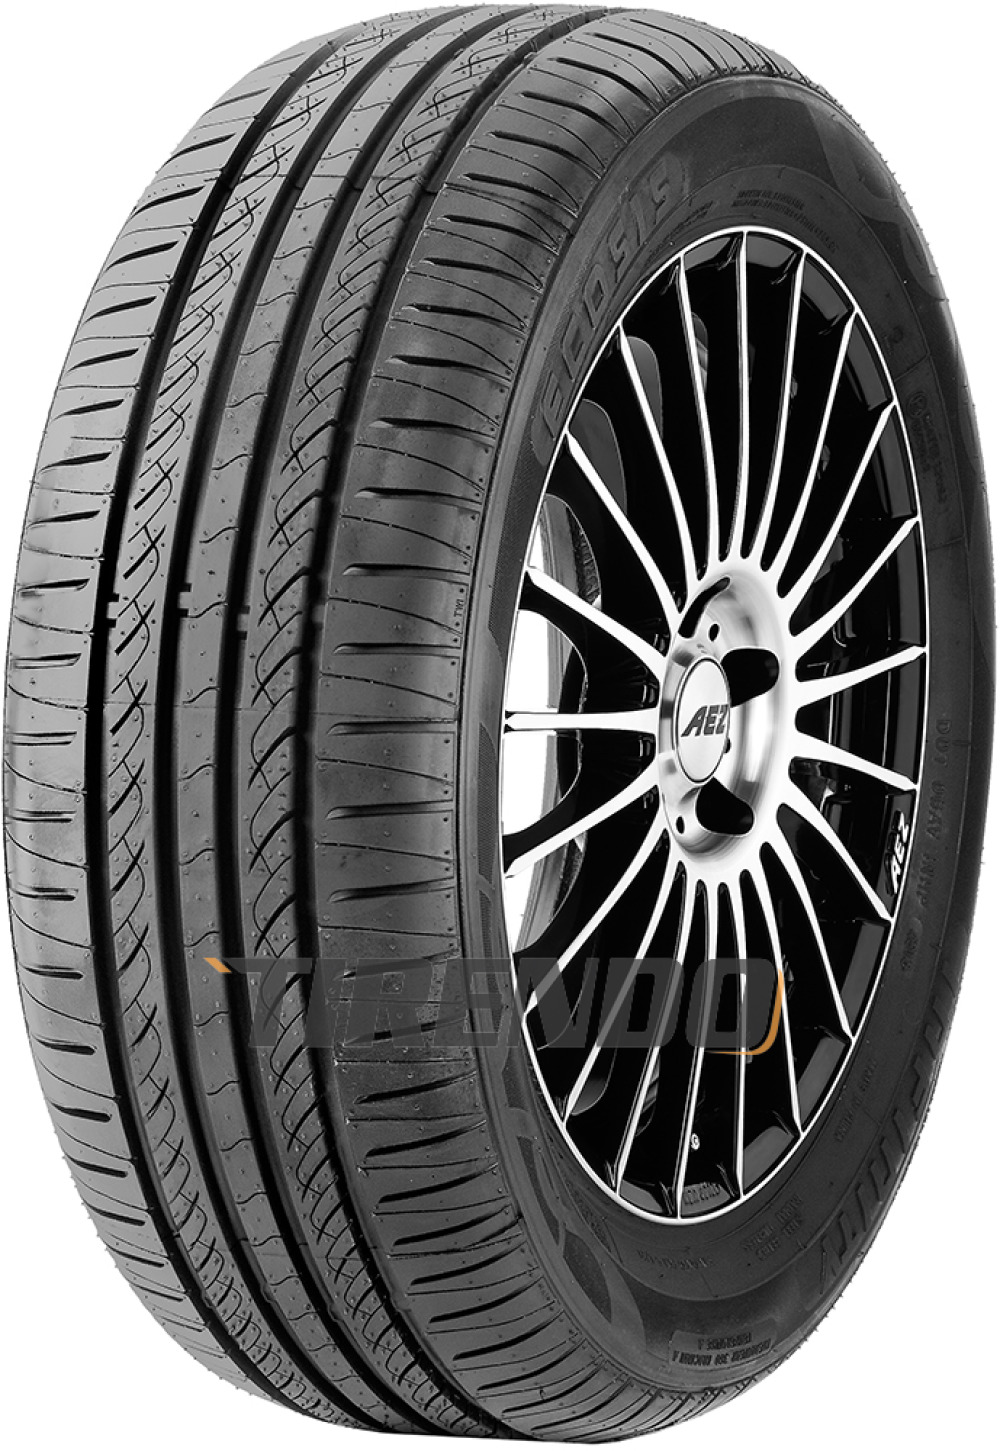 INFINITY ECOSIS 185/65 R 15 88H